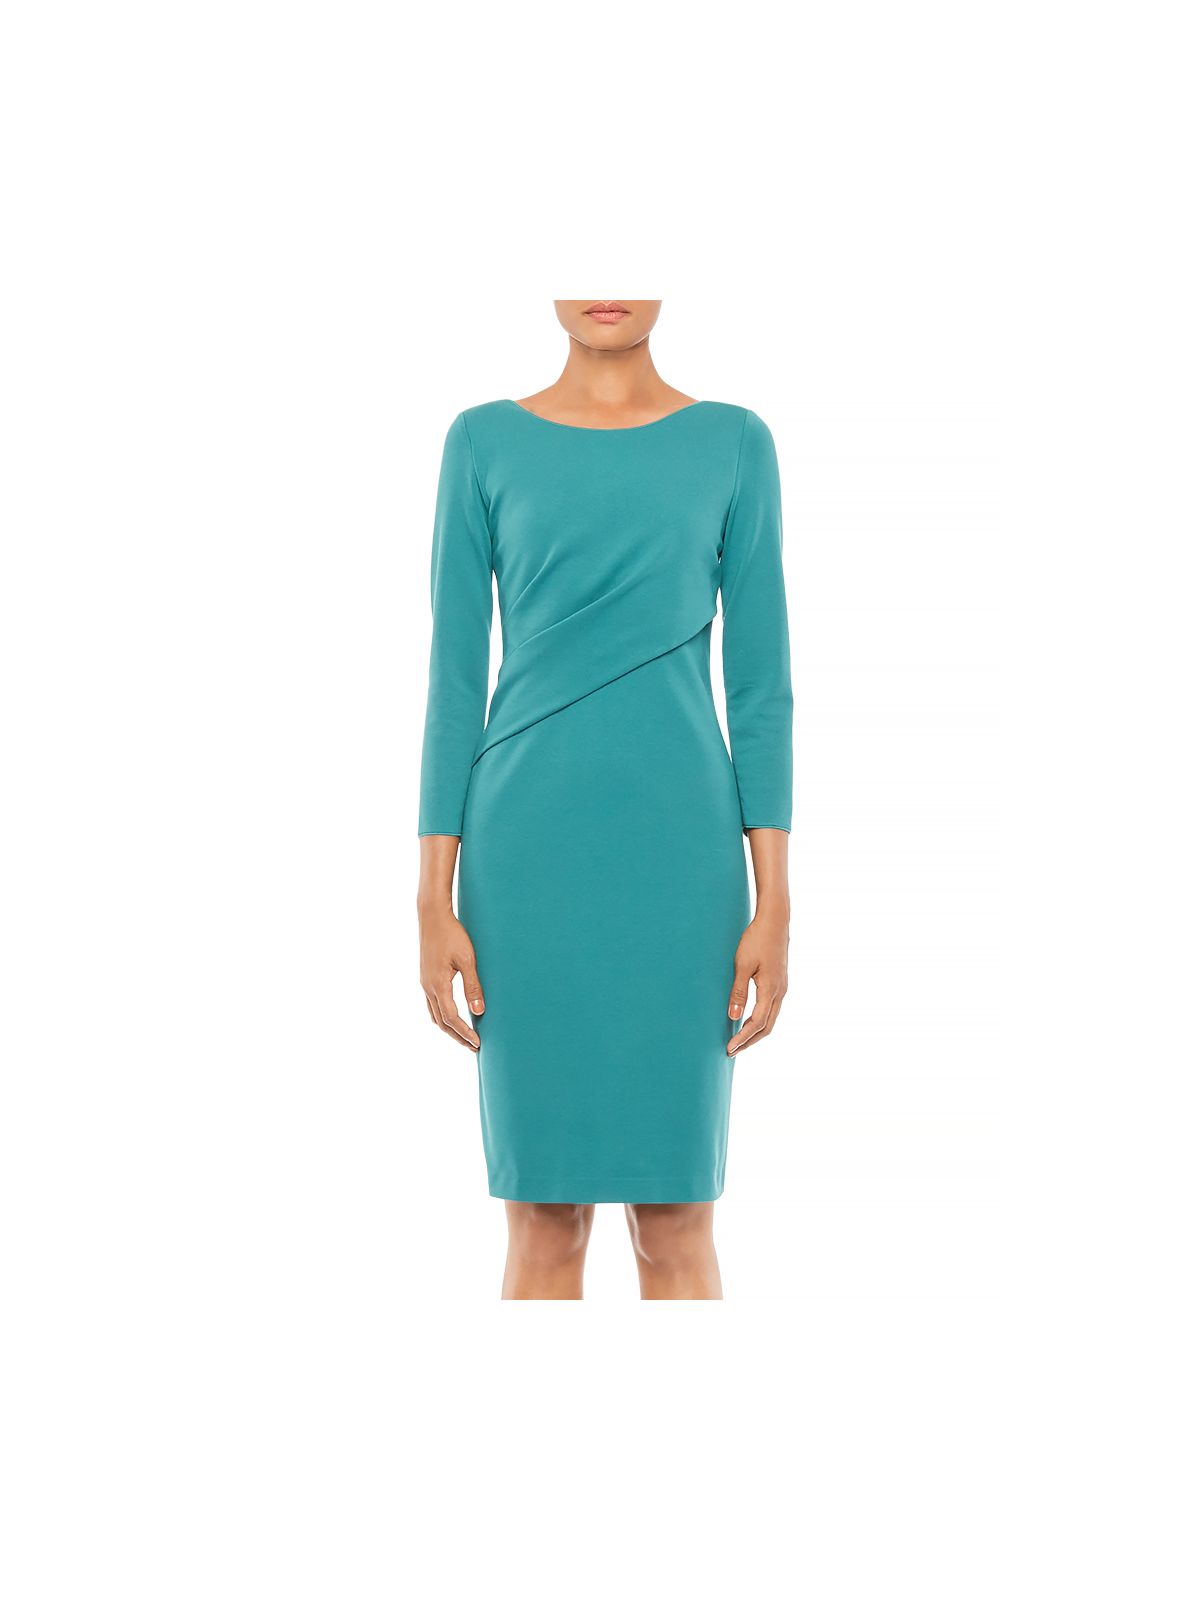 Emporio Armani Womens Teal Ruched Faux Suede Long Sleeve Scoop Neck Above The Knee Wear To Work Sheath Dress 40